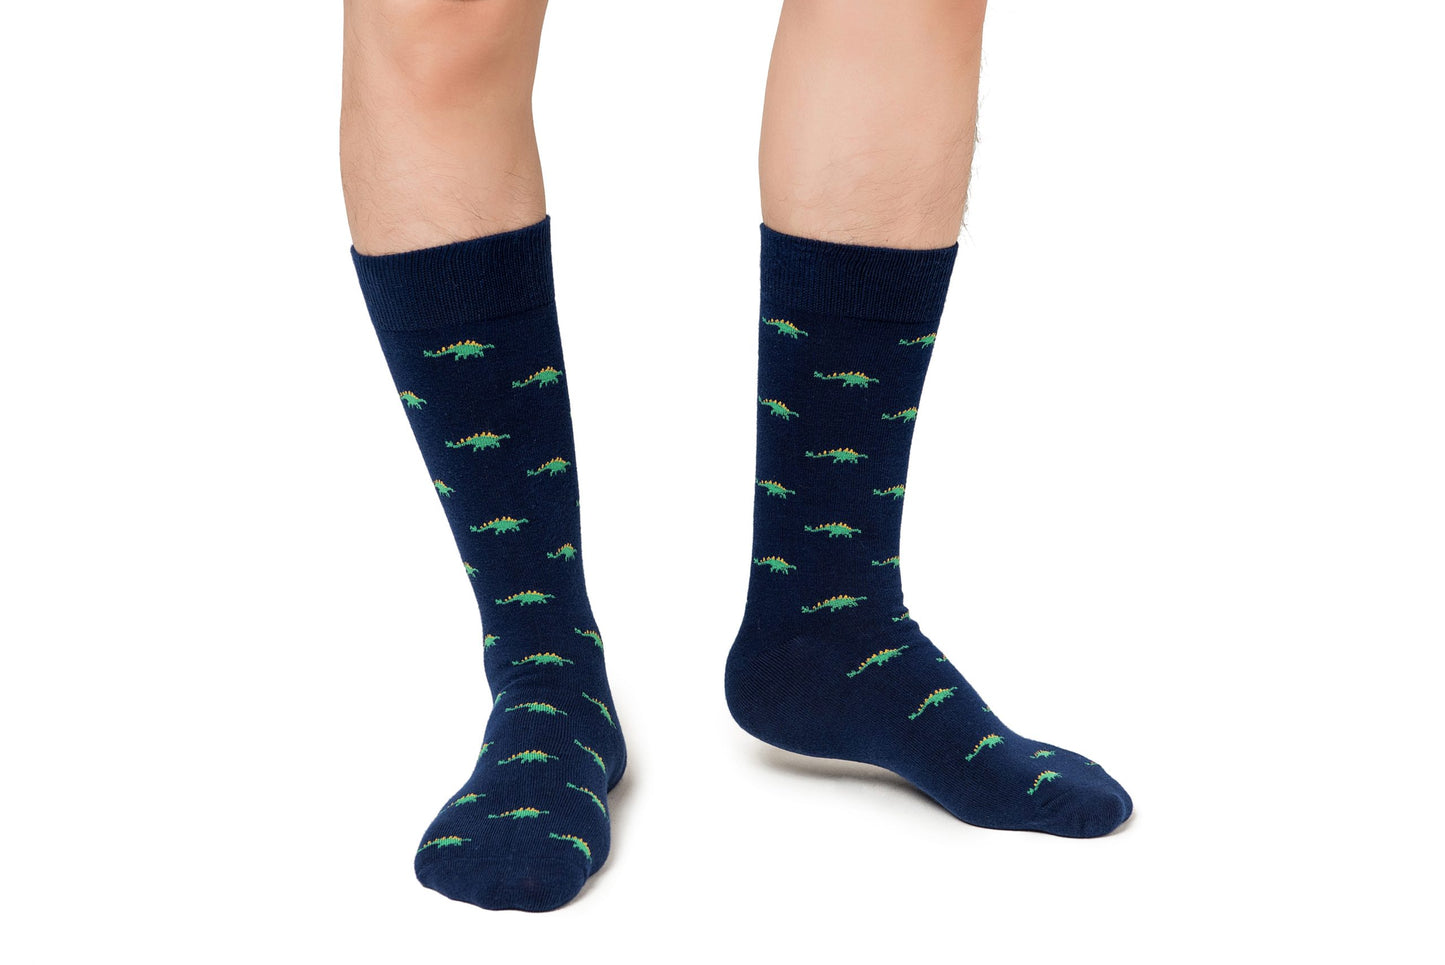 A person standing in Stegosaurus Socks with a whimsical green alligator pattern, isolated on a white background.